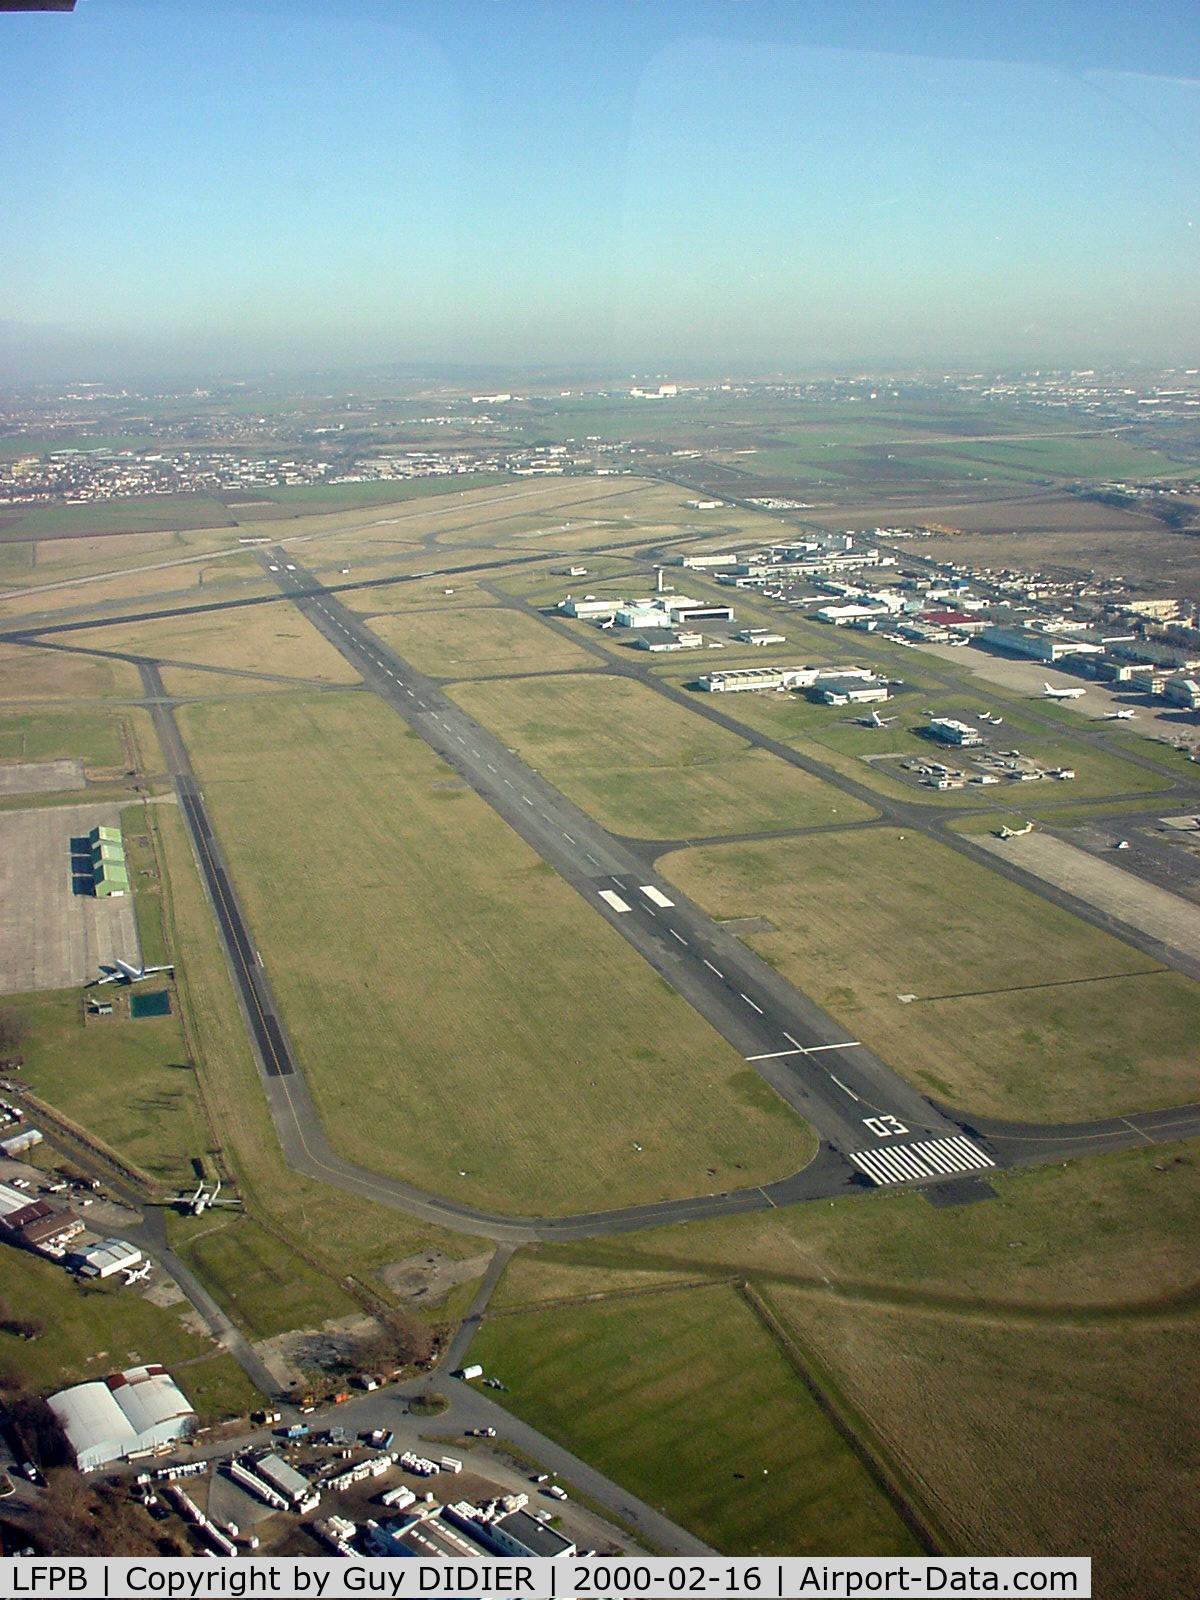 Paris Airport,  France (LFPB) - In 2000, its was still authorized to fly VFR here. Now prohibited (too close from Paris)